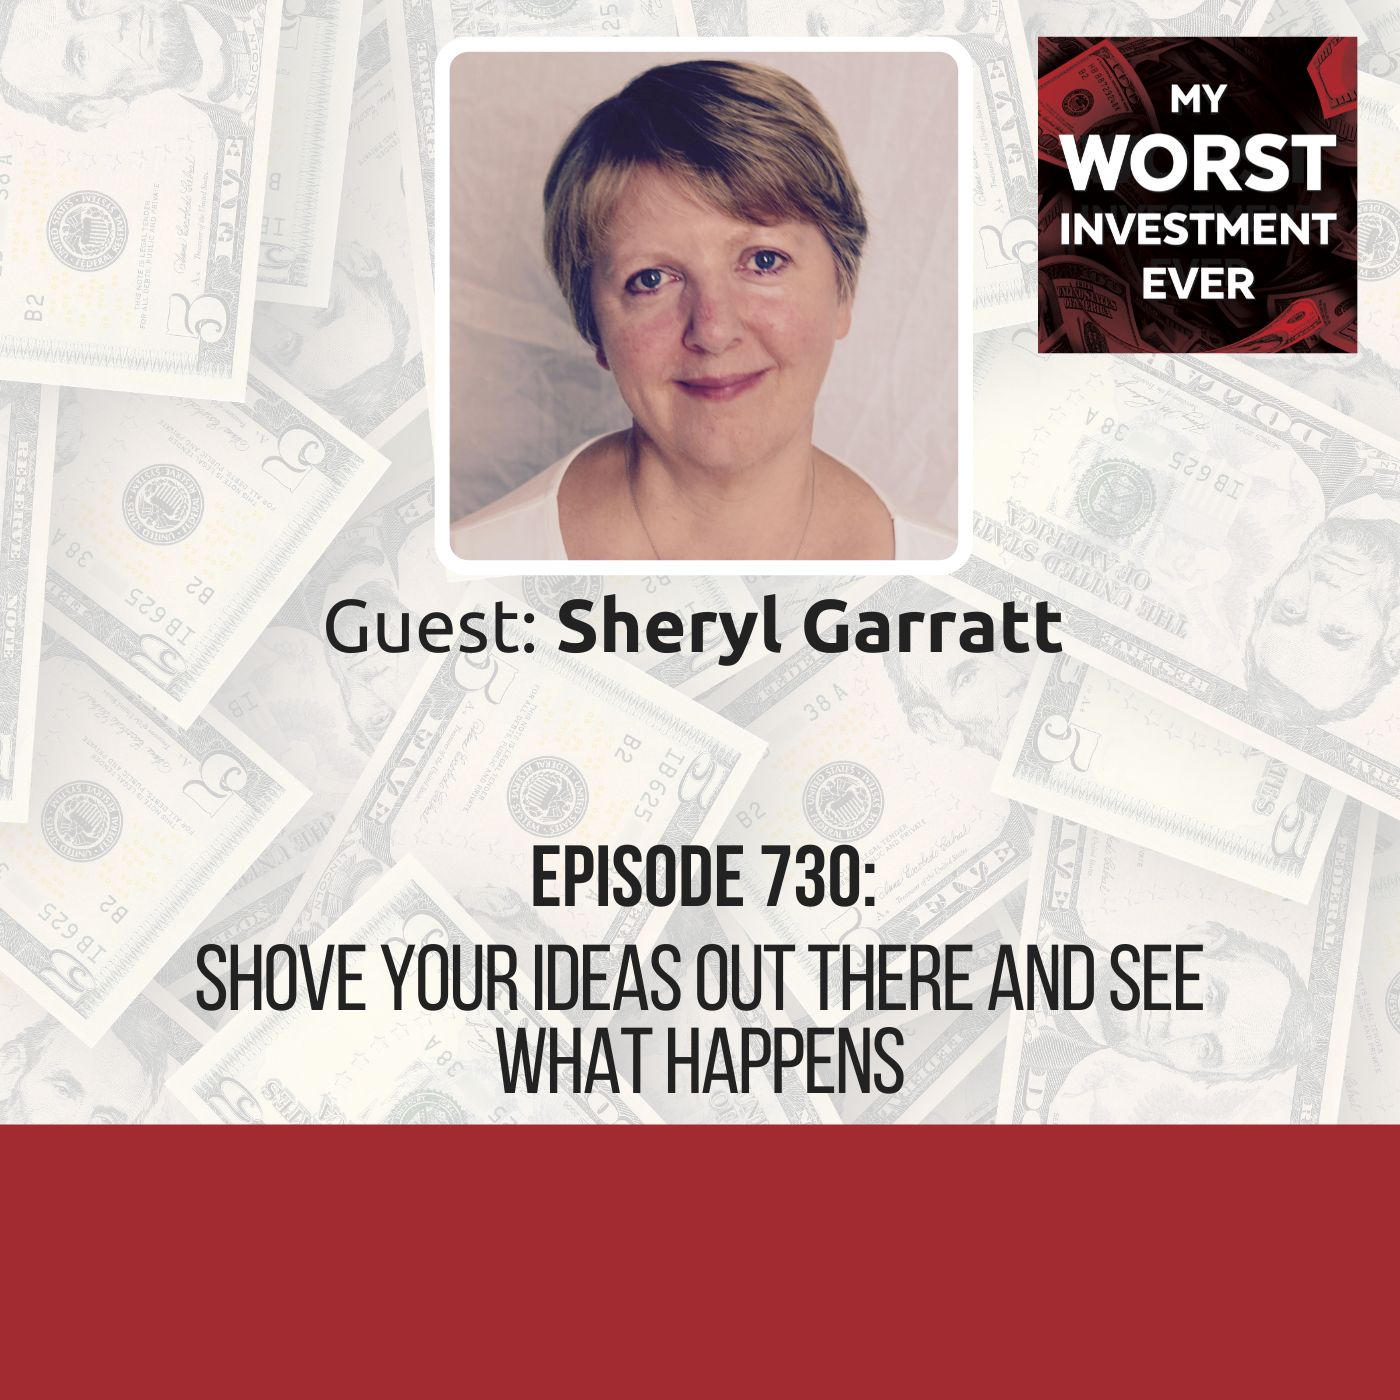 Sheryl Garratt – Shove Your Ideas Out There and See What Happens